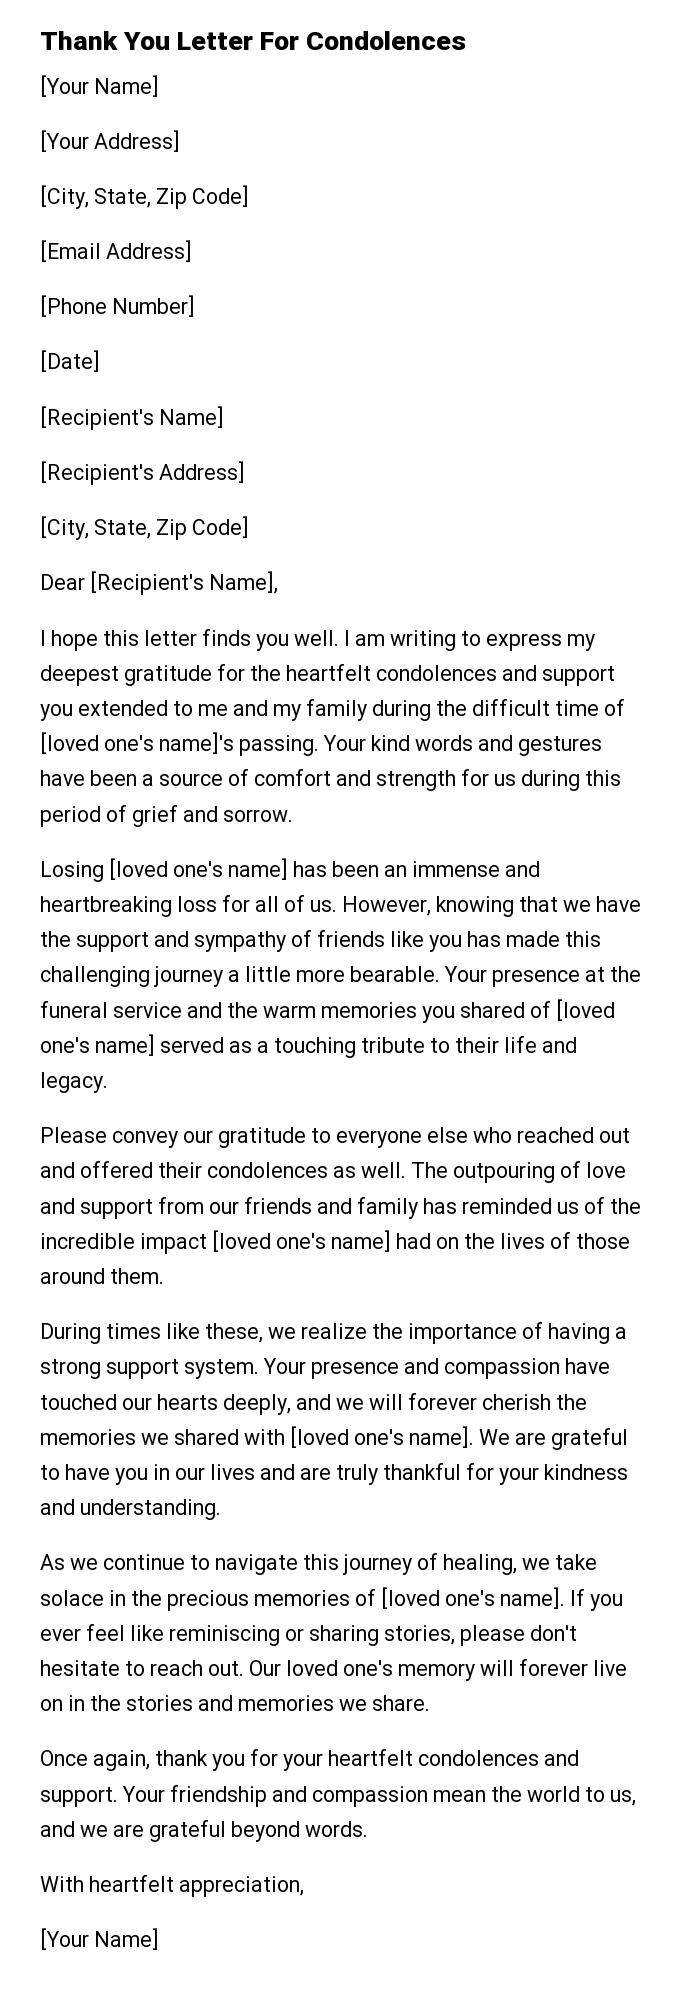 Thank You Letter For Condolences